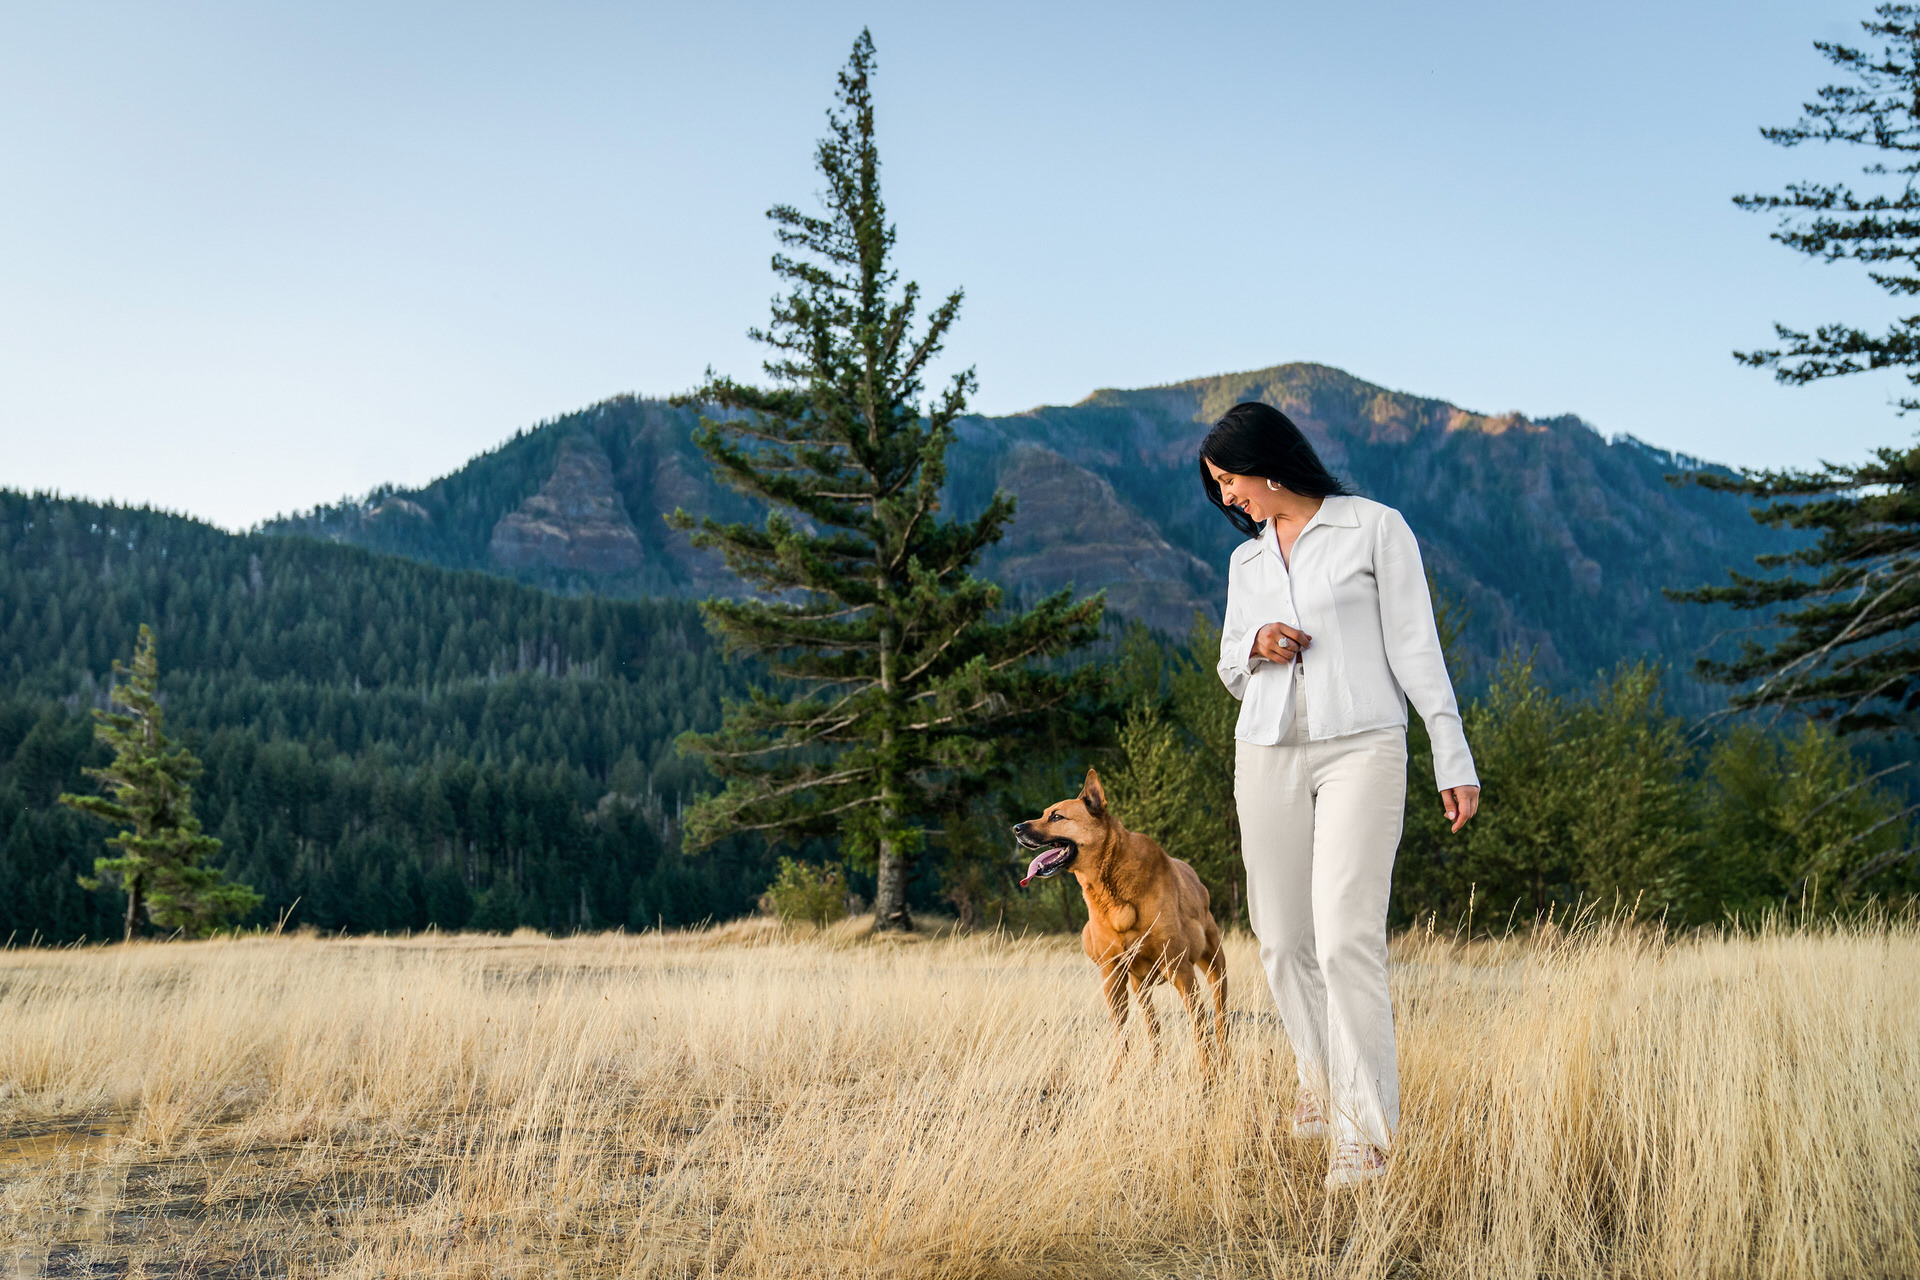 woman walks through field of tall grass with dog